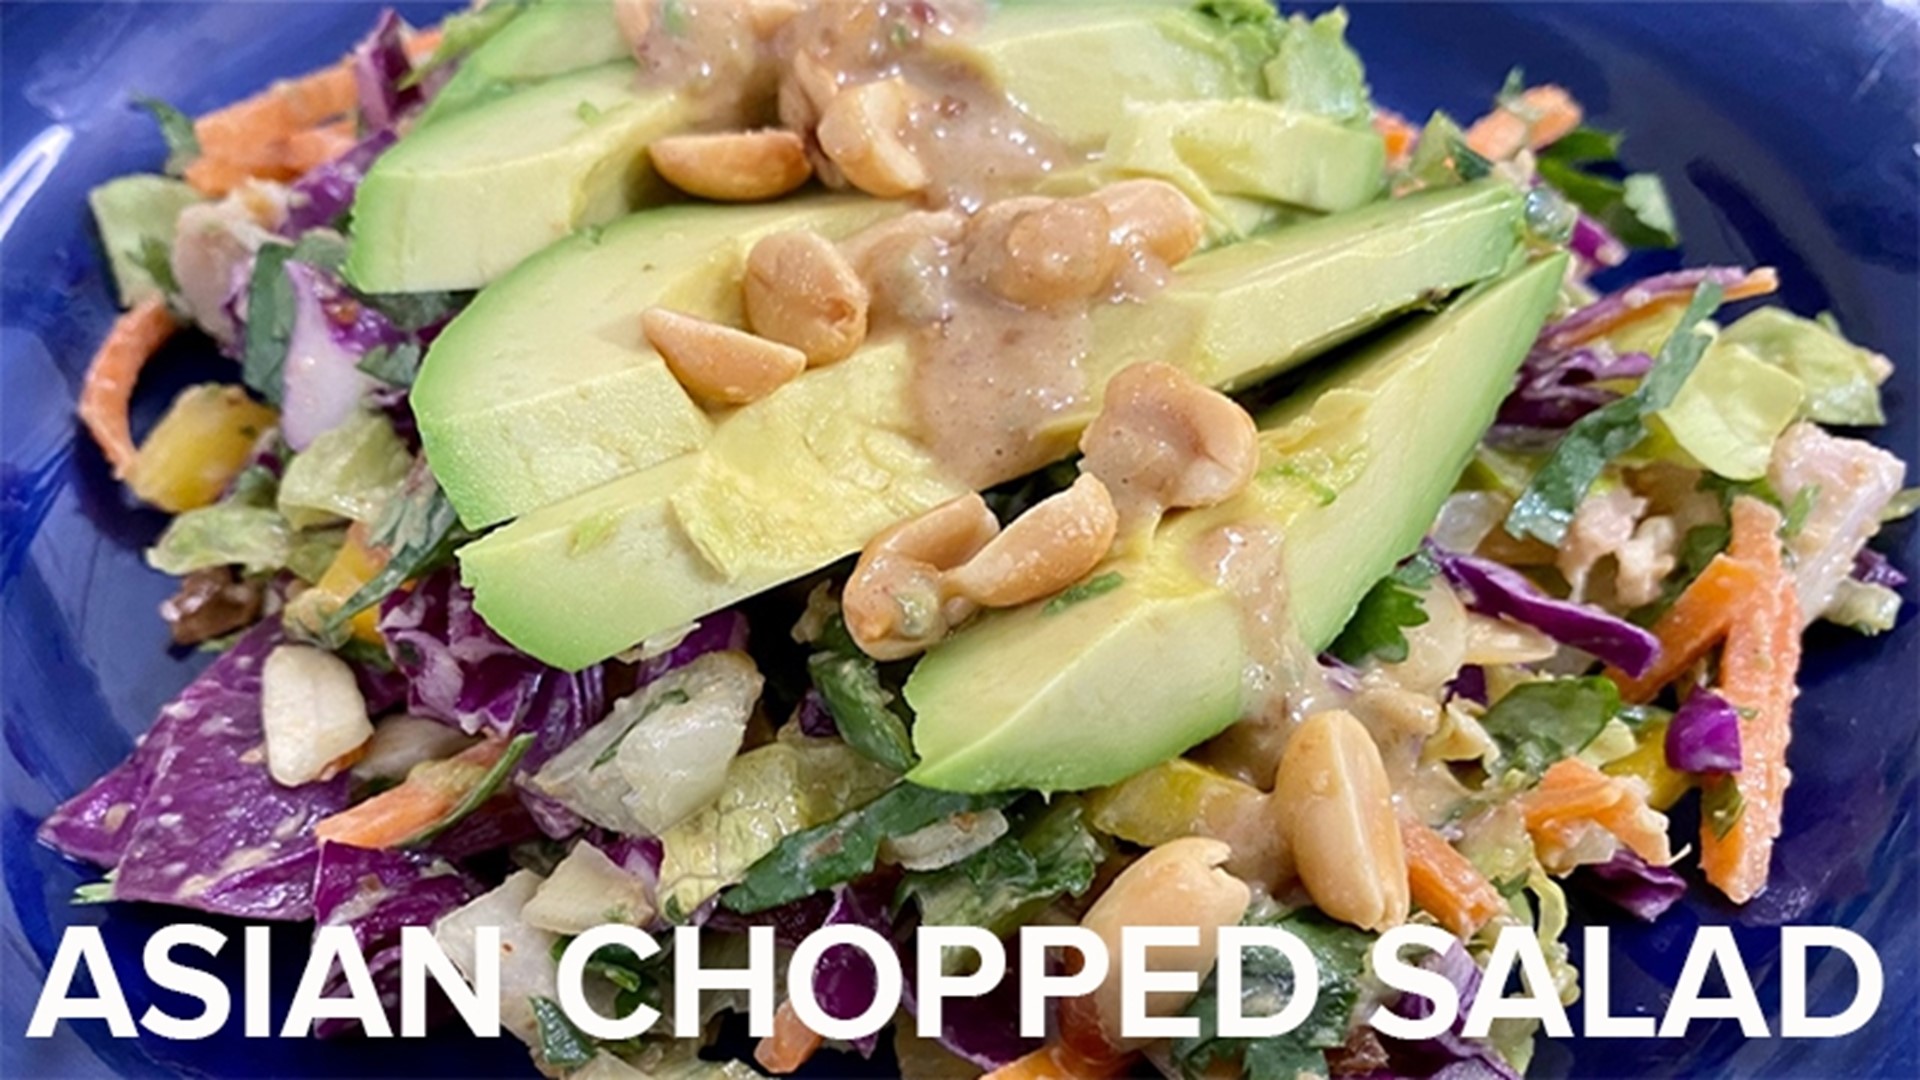 Kev has a filling and healthy Asian Chopped Salad with chicken where the star of the show is the dressing which is so good and can you believe it even has a date.